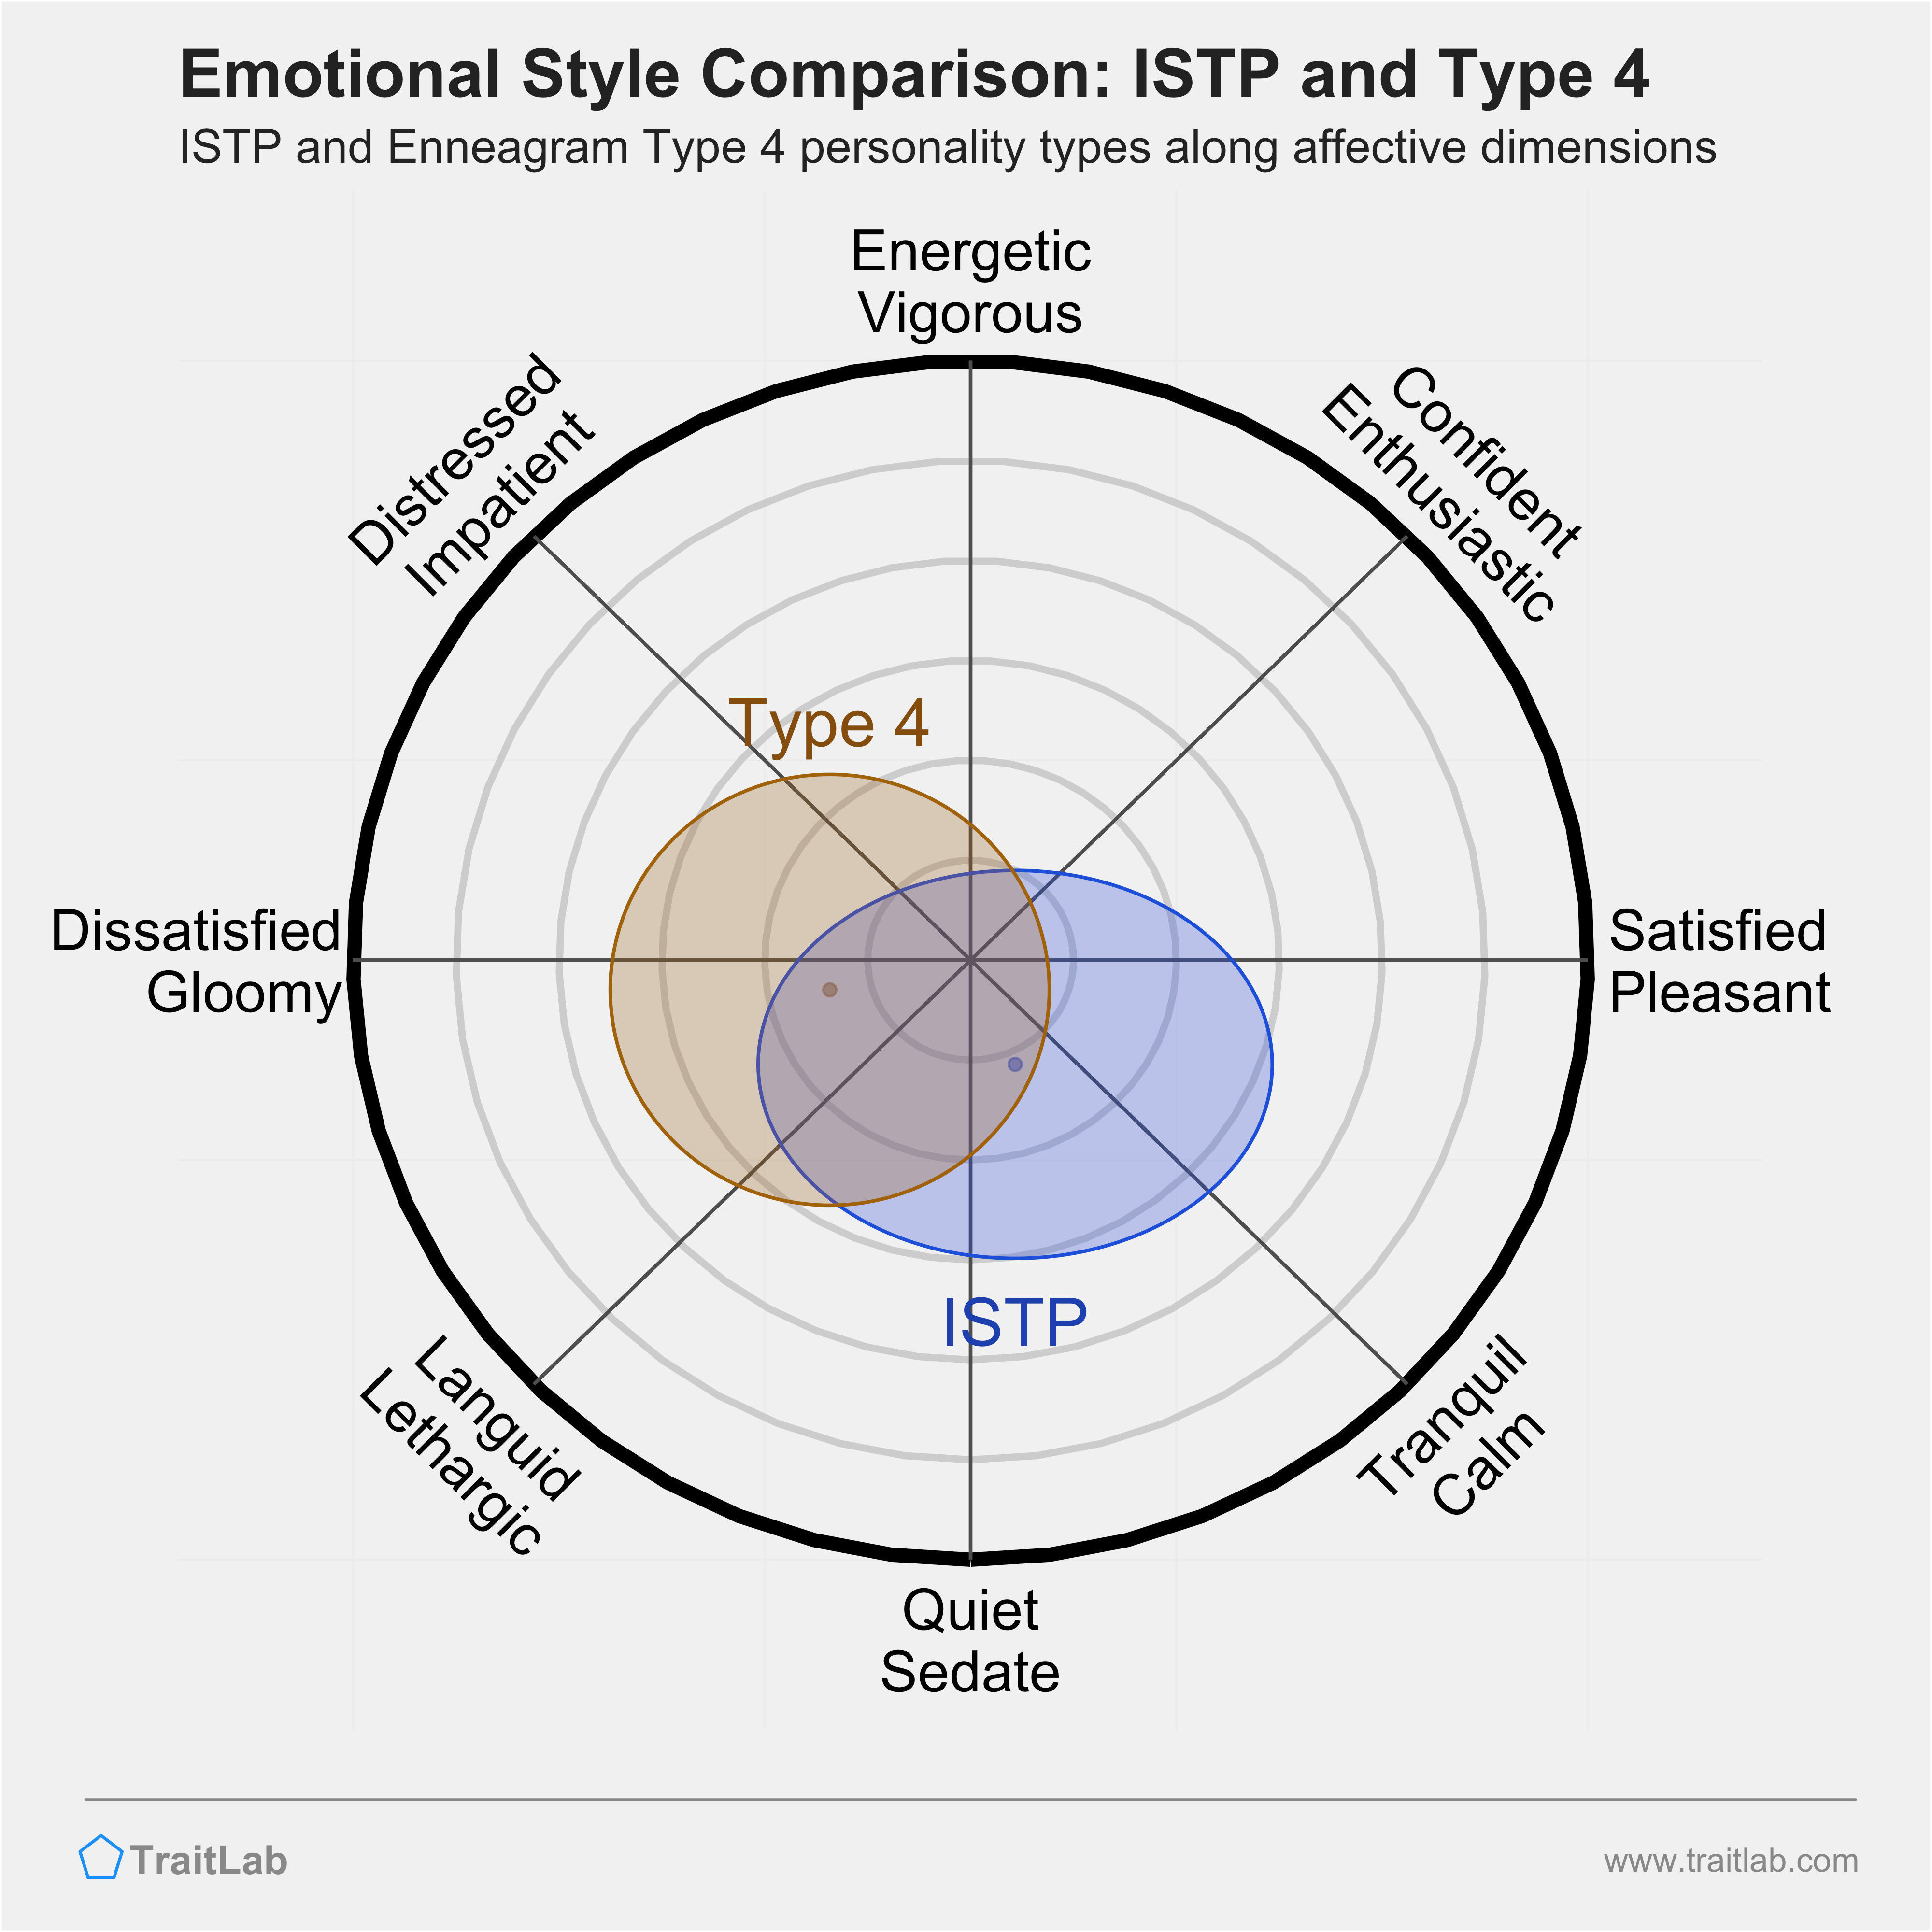 ISTP and Type 4 comparison across emotional (affective) dimensions